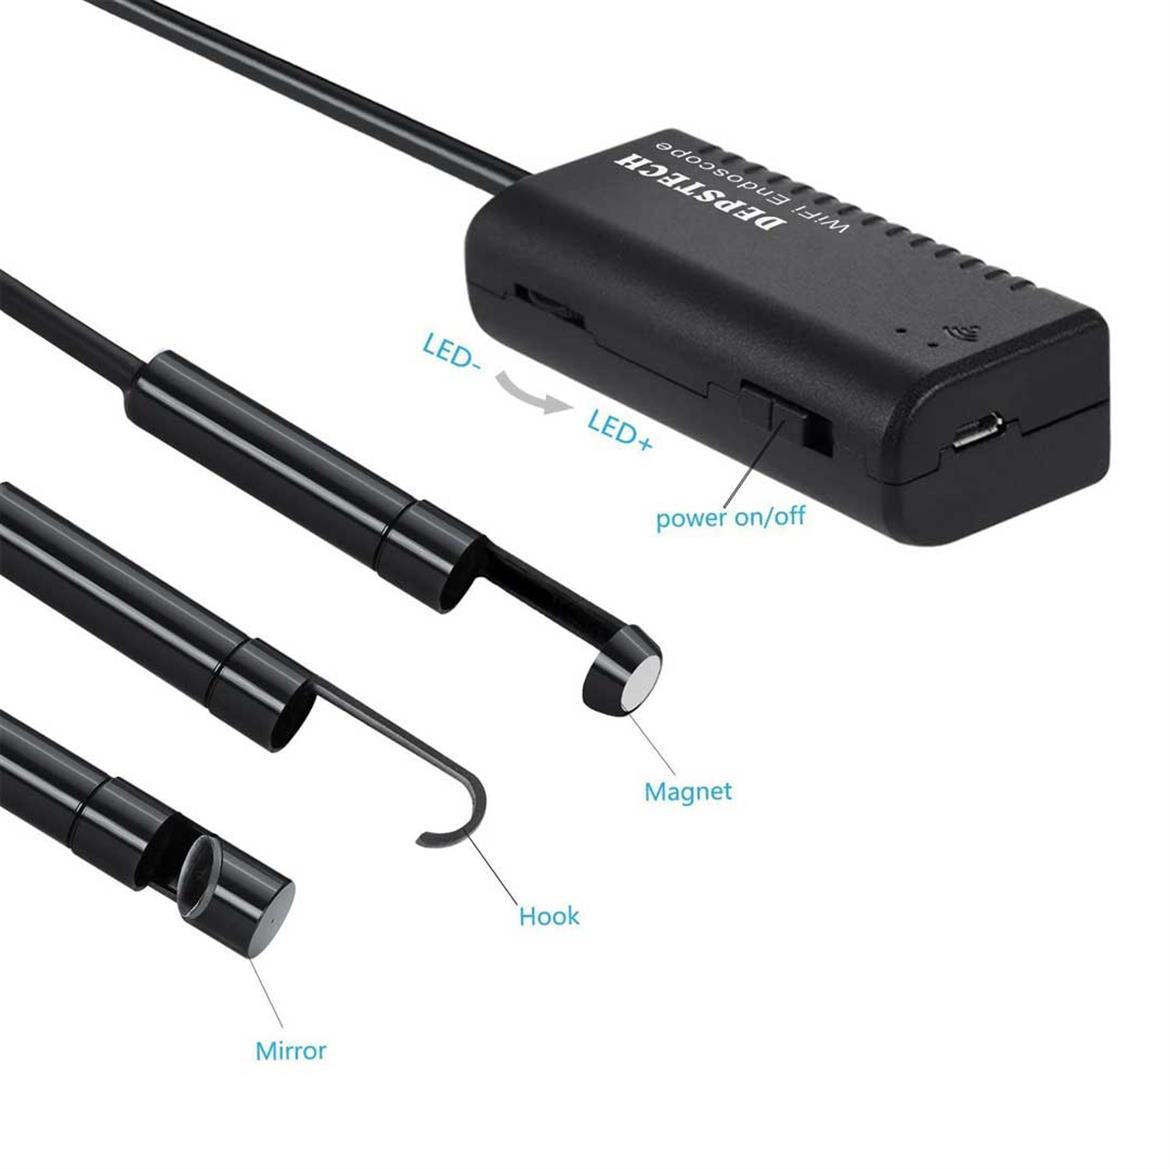 Depstech Endoscope Deal Lets You See Inside Almost Anything With Your Phone For $36